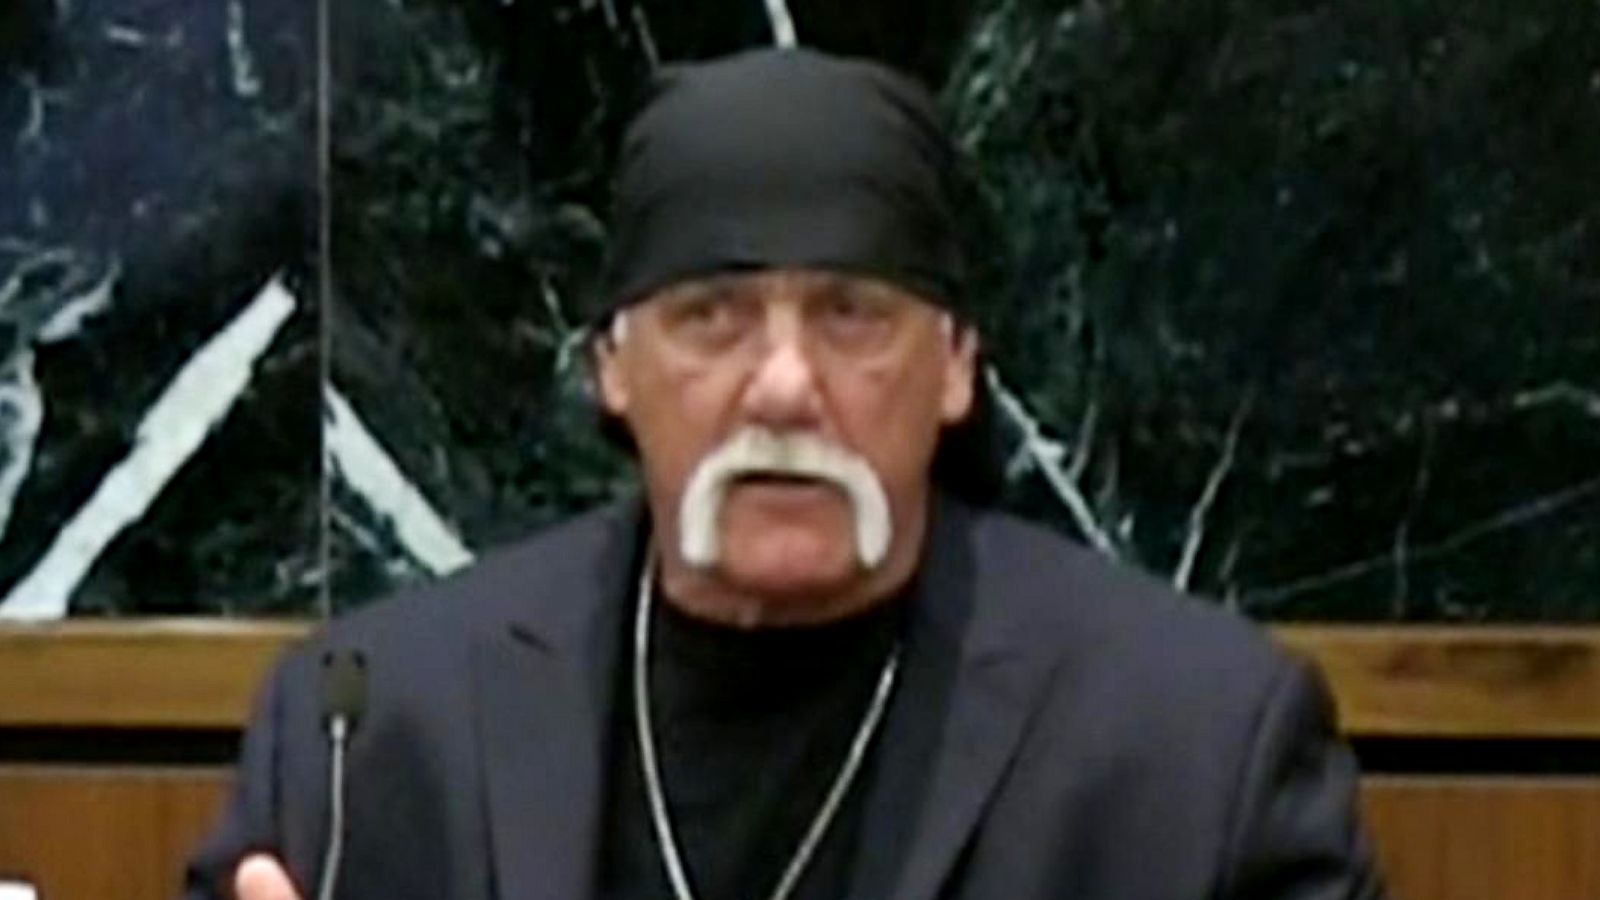 Hulk Hogans Personal Life Discussed During Sex Tape Testimony image